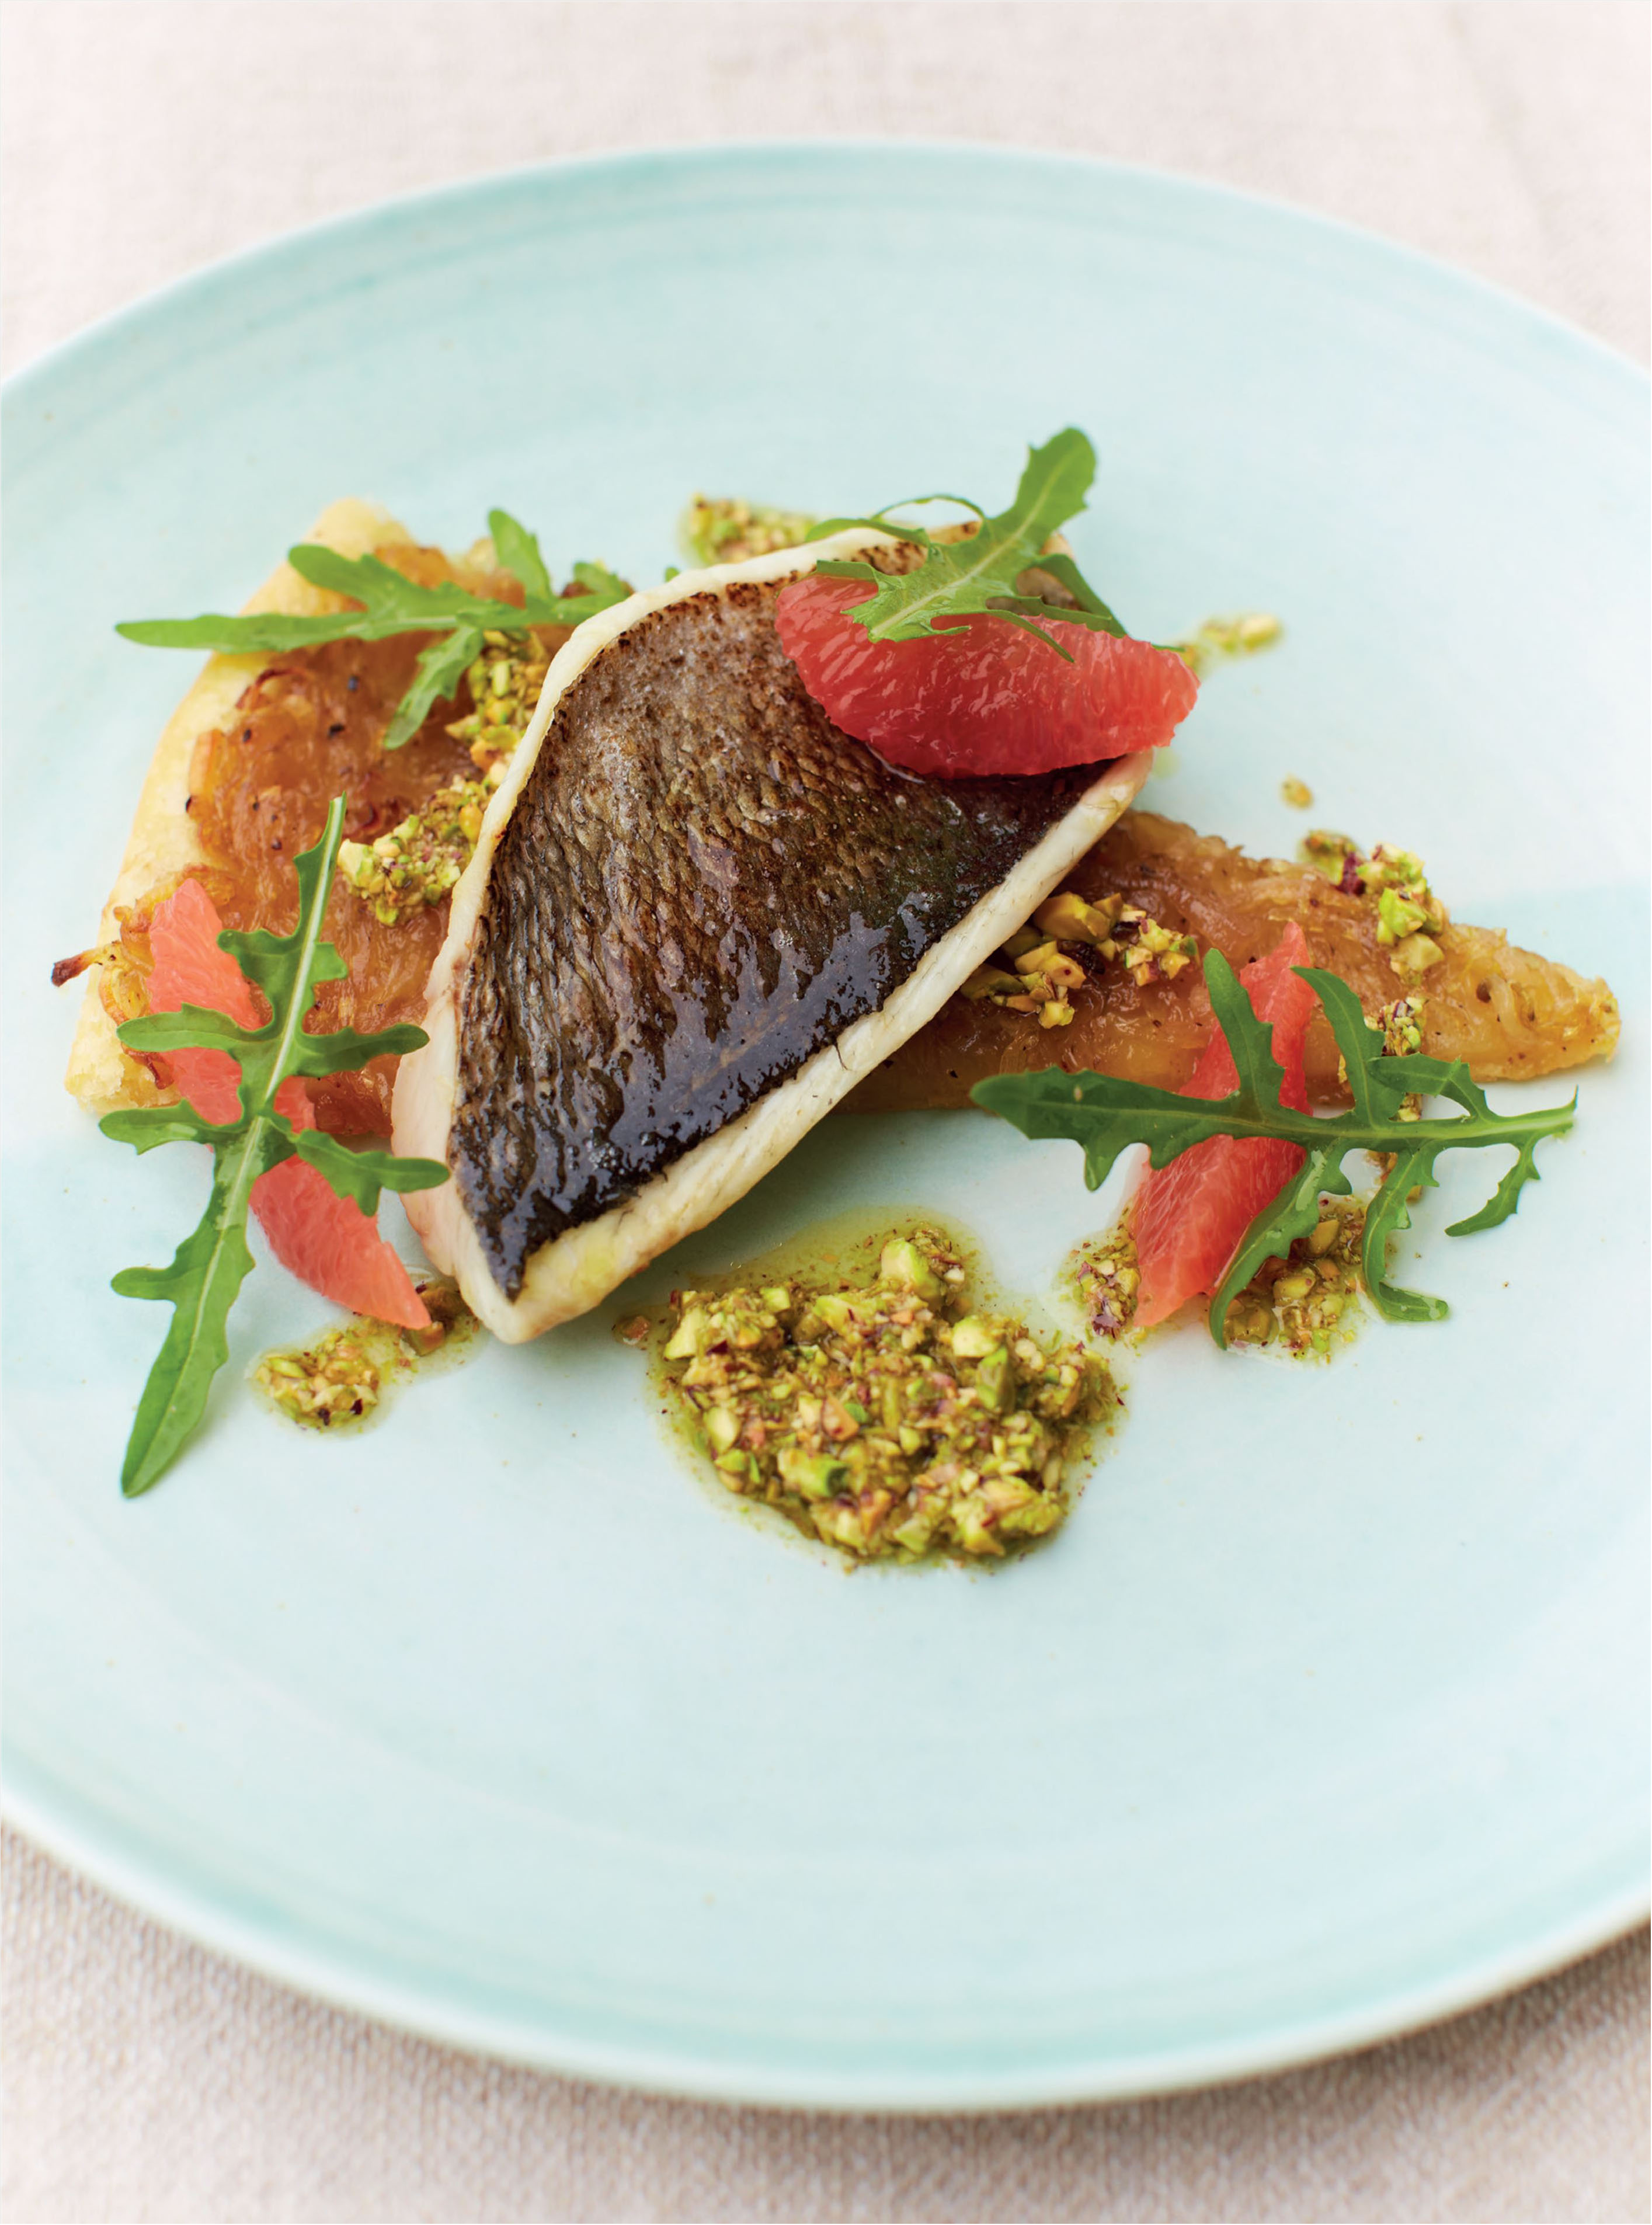 Bream with chicory tart, pink grapefruit and pistachio dressing